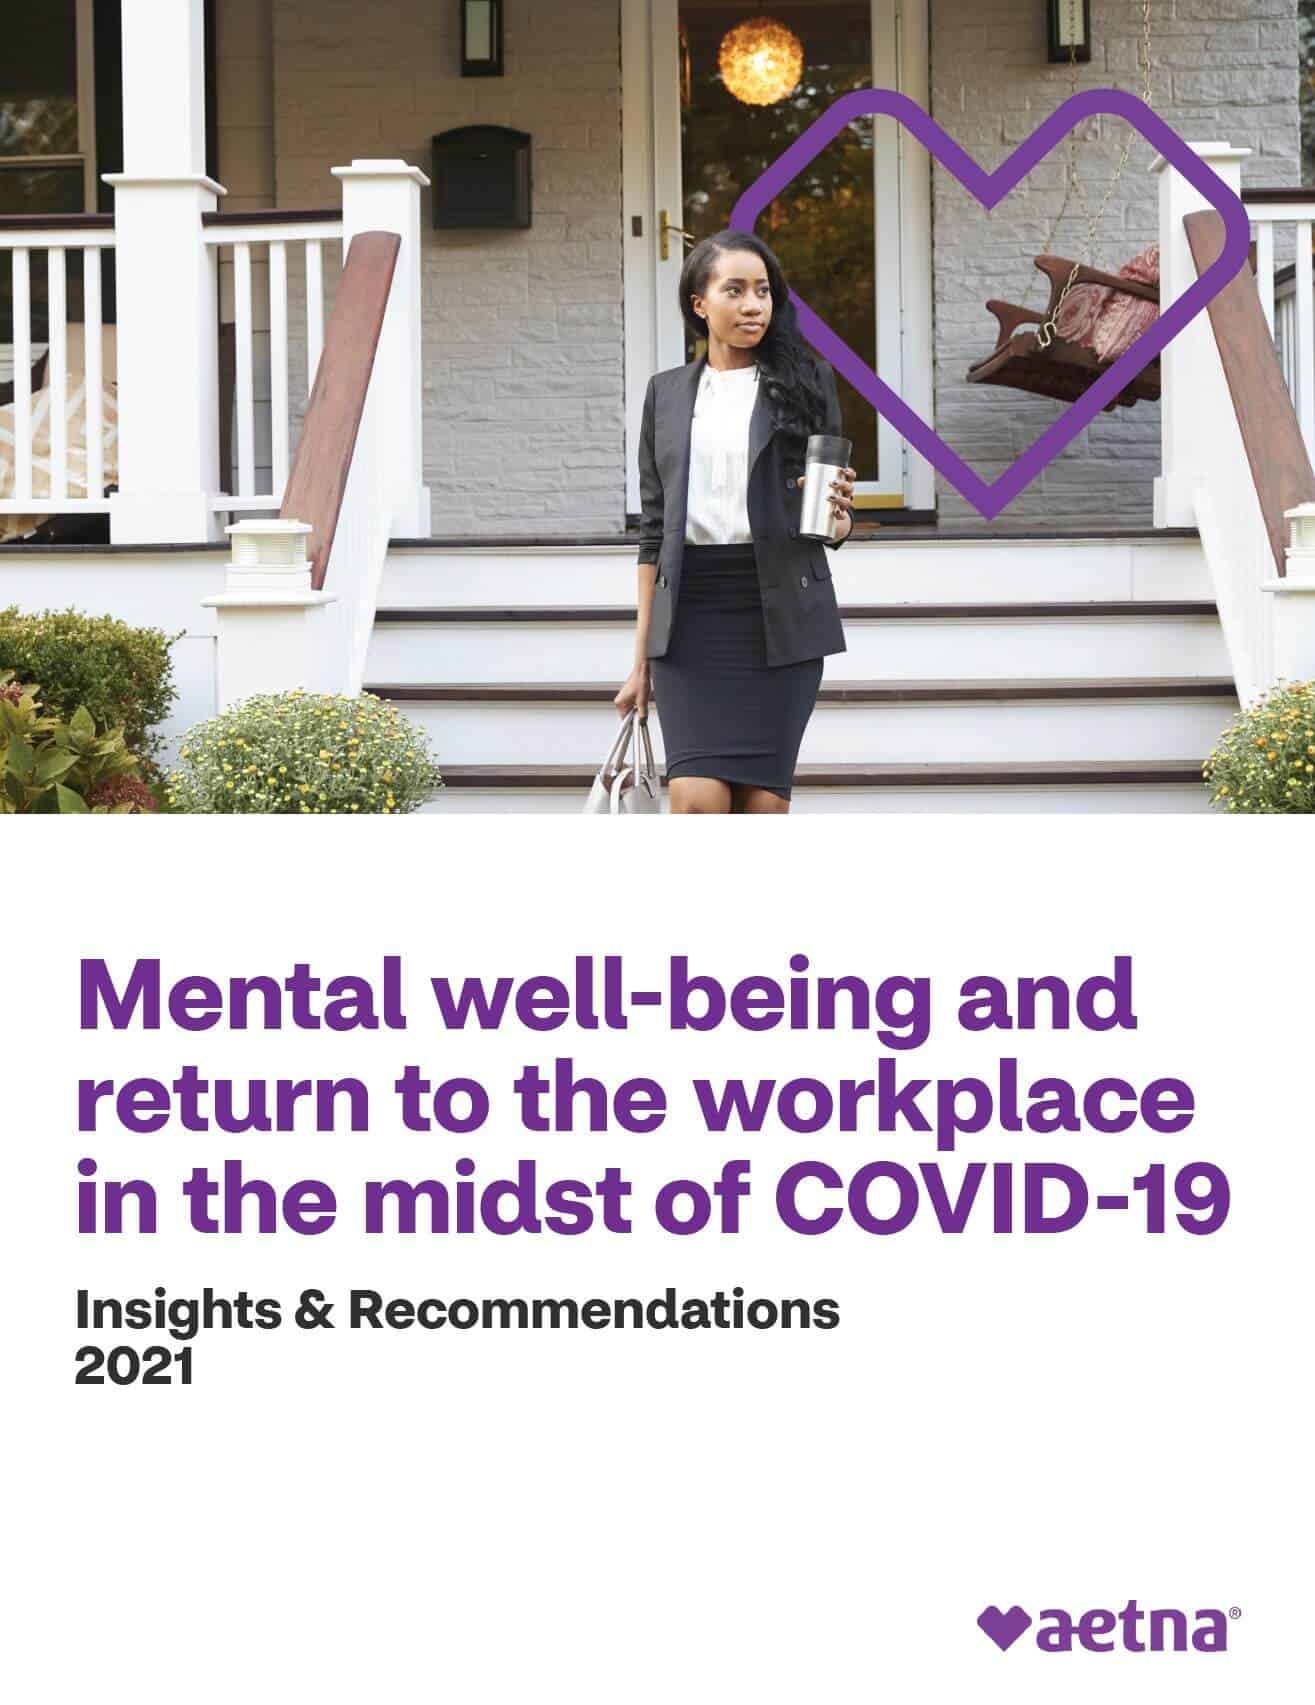 Mental Health and Covid-19